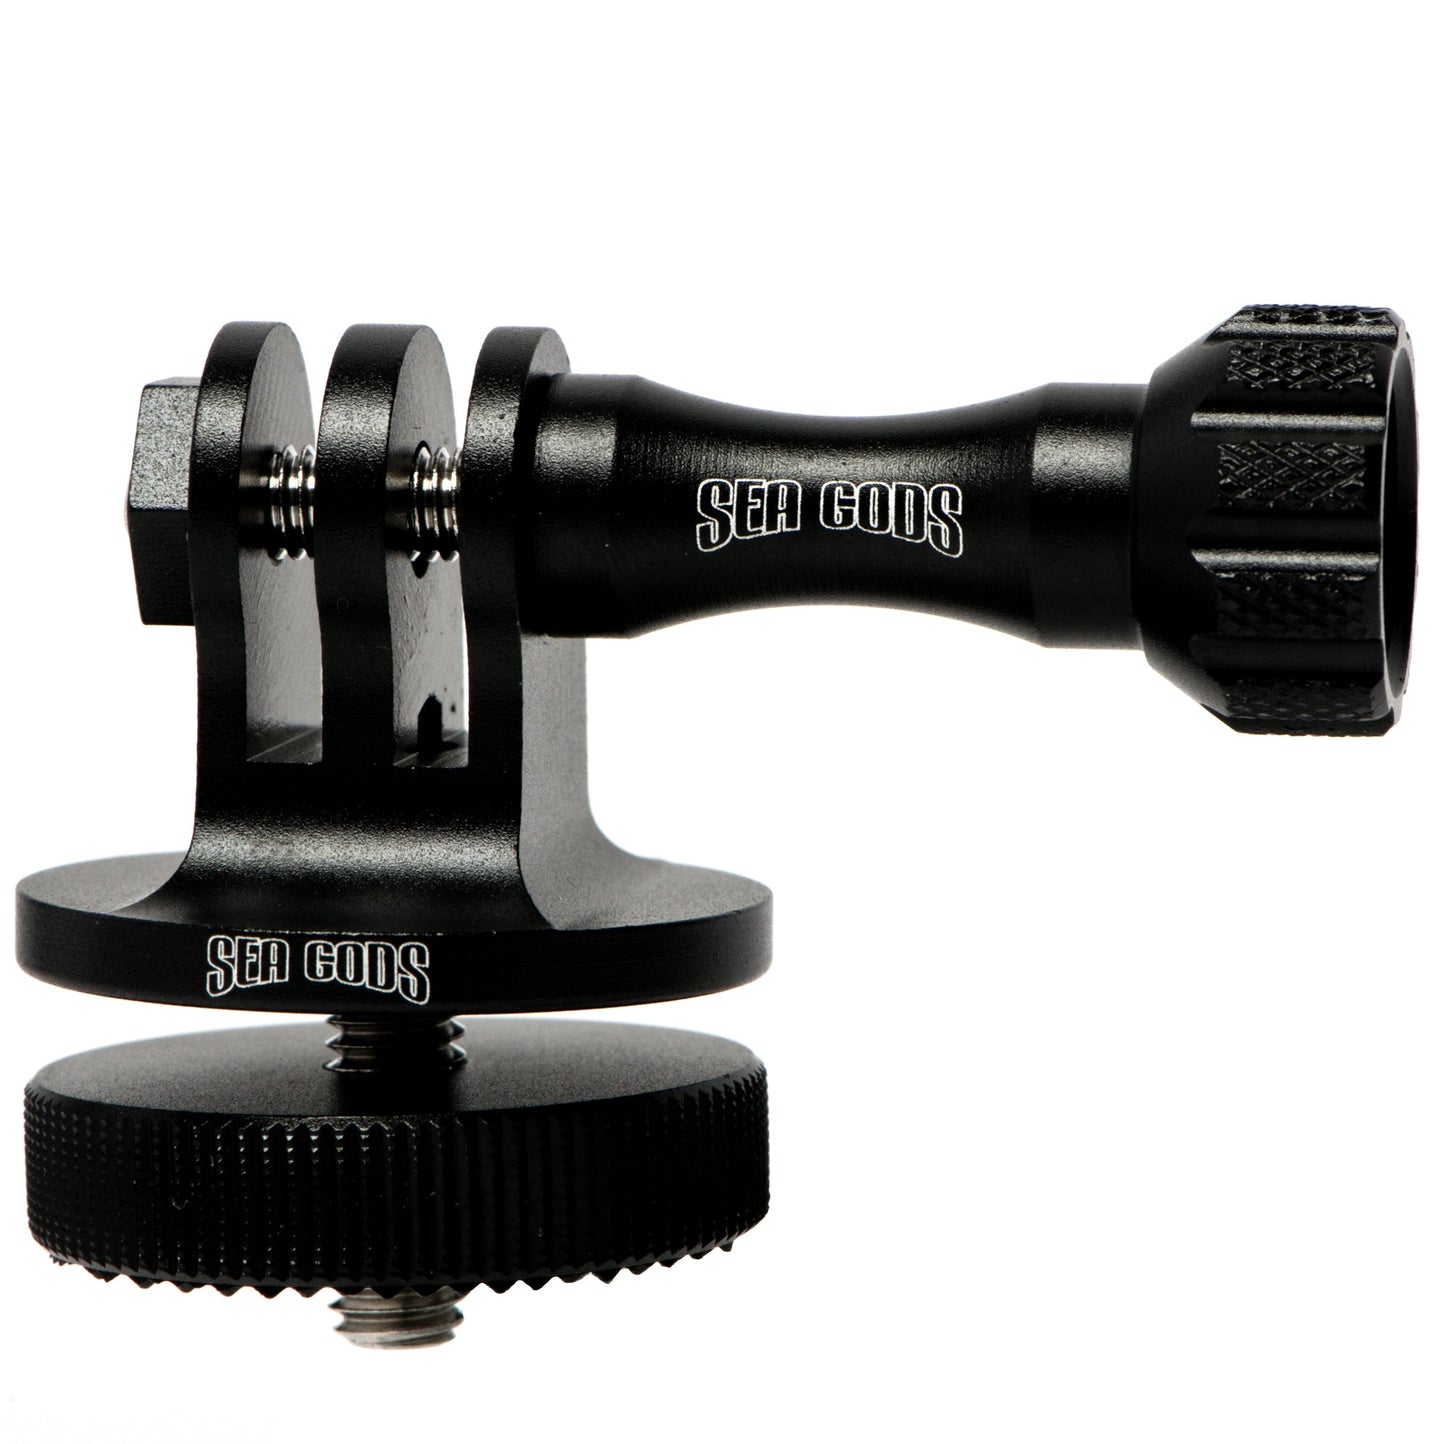 | Action Camera Mount Attachment for SUP Boards